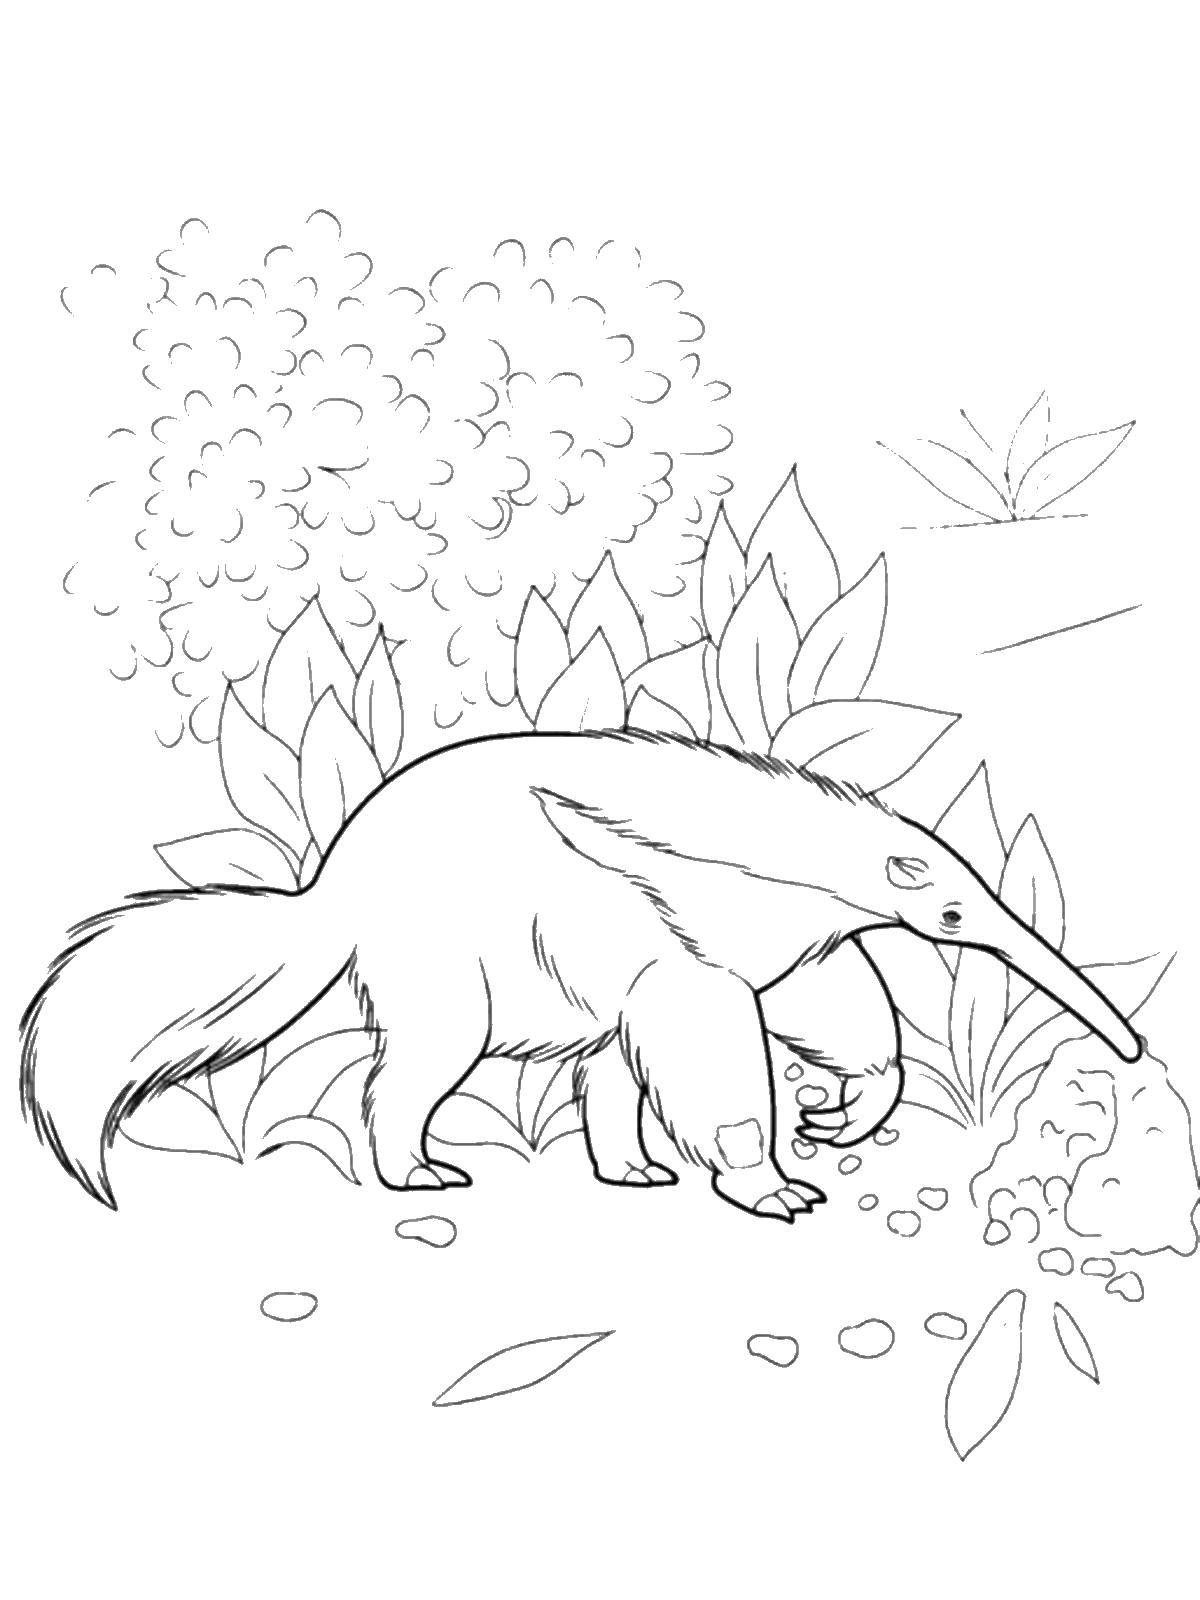 Coloring Anteater. Category wild animals. Tags:  Anteater.